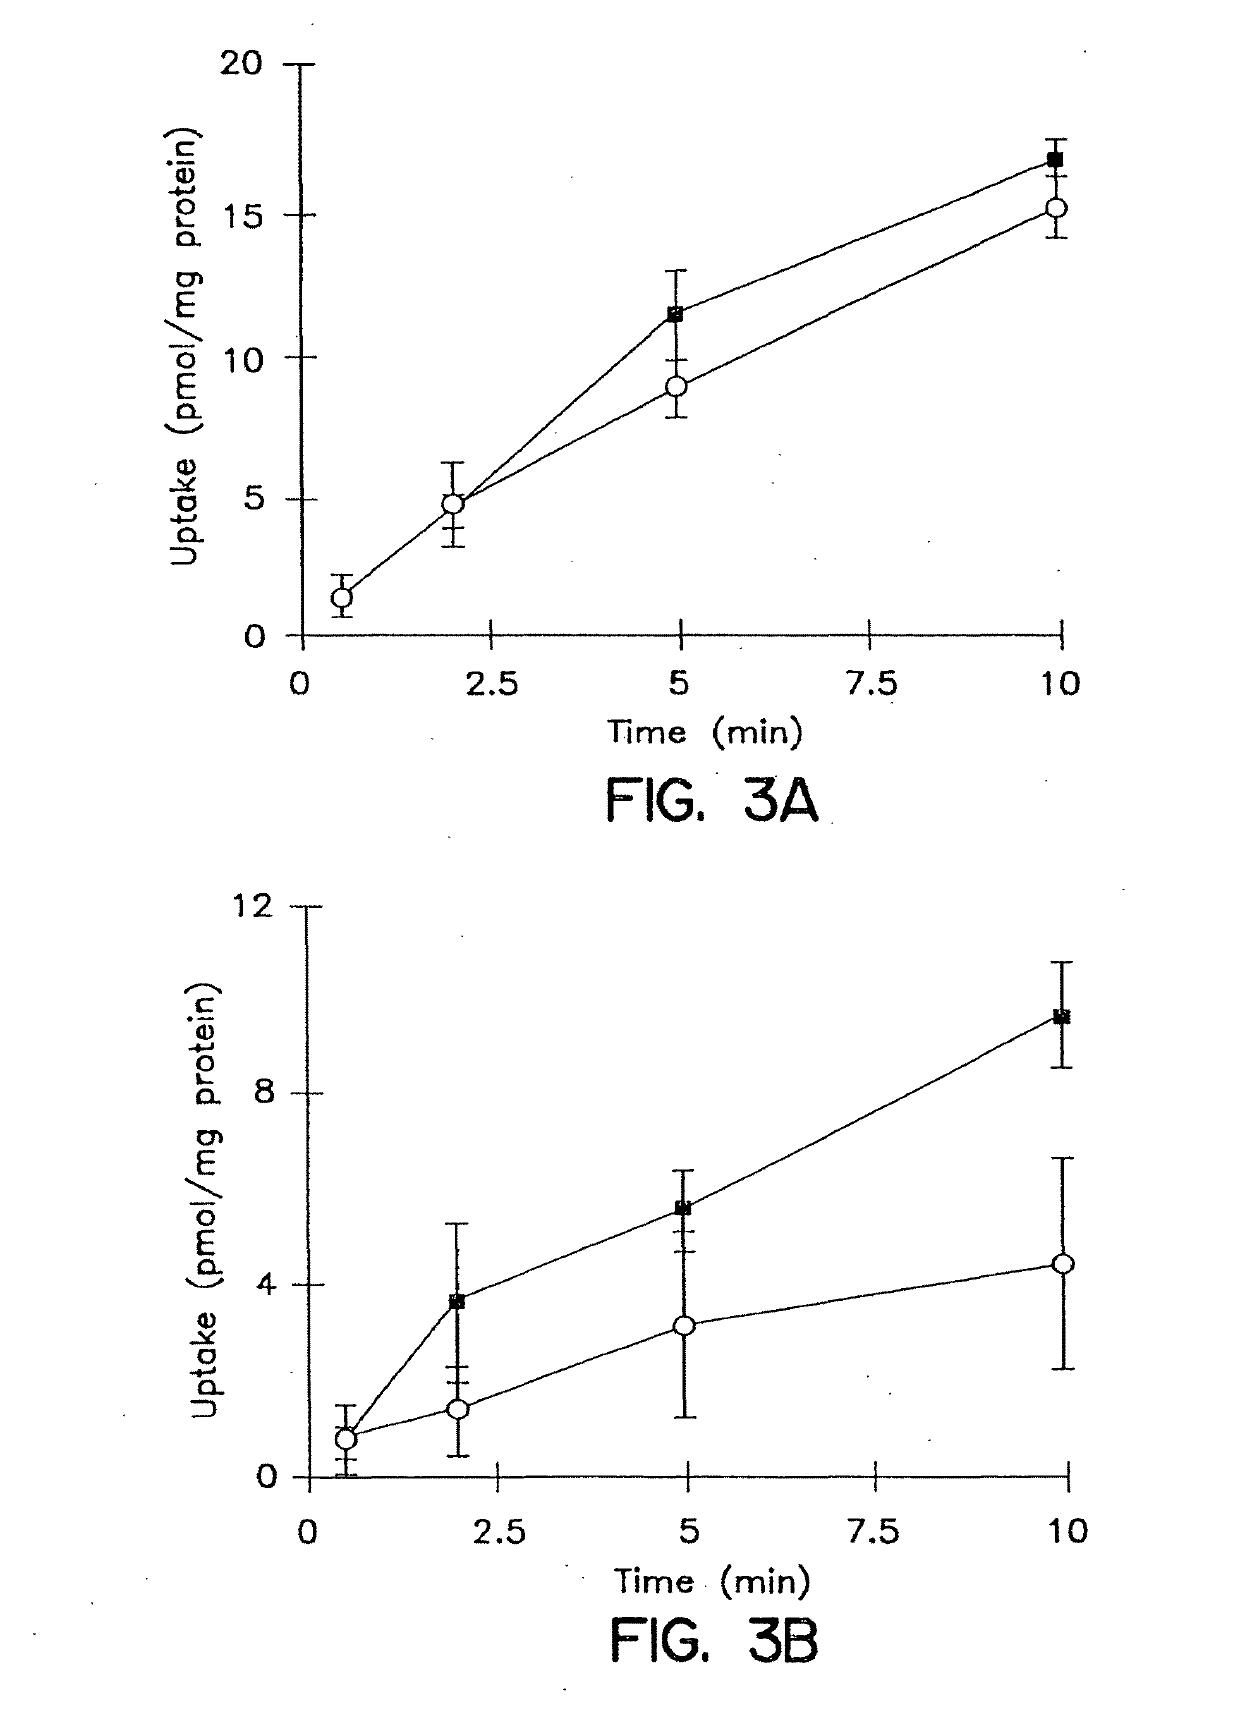 Method for inhibiting expression of a protein in a hepatocyte